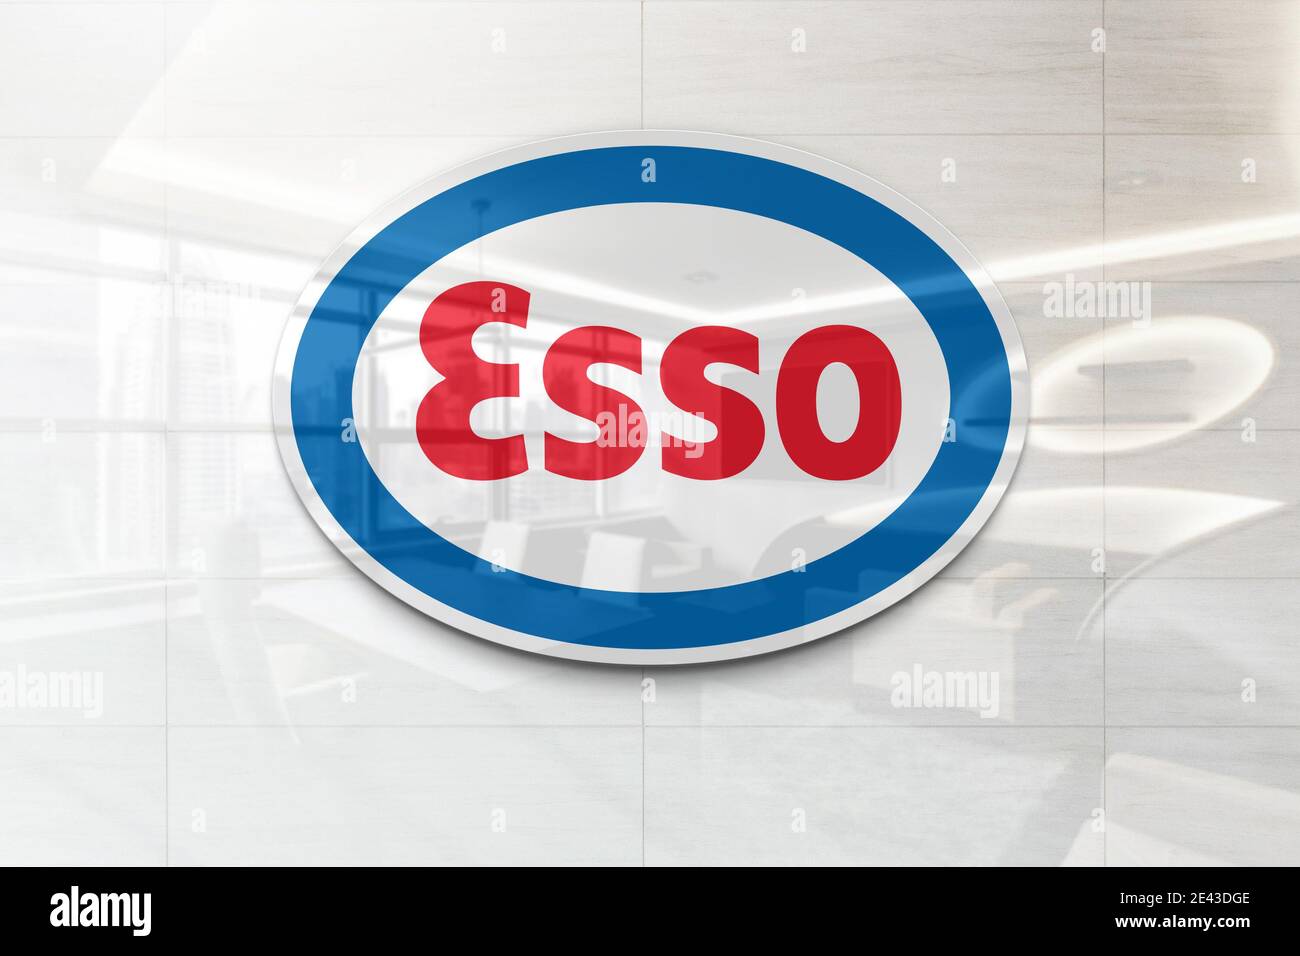 esso logo on reflective business wall plaque Stock Photo